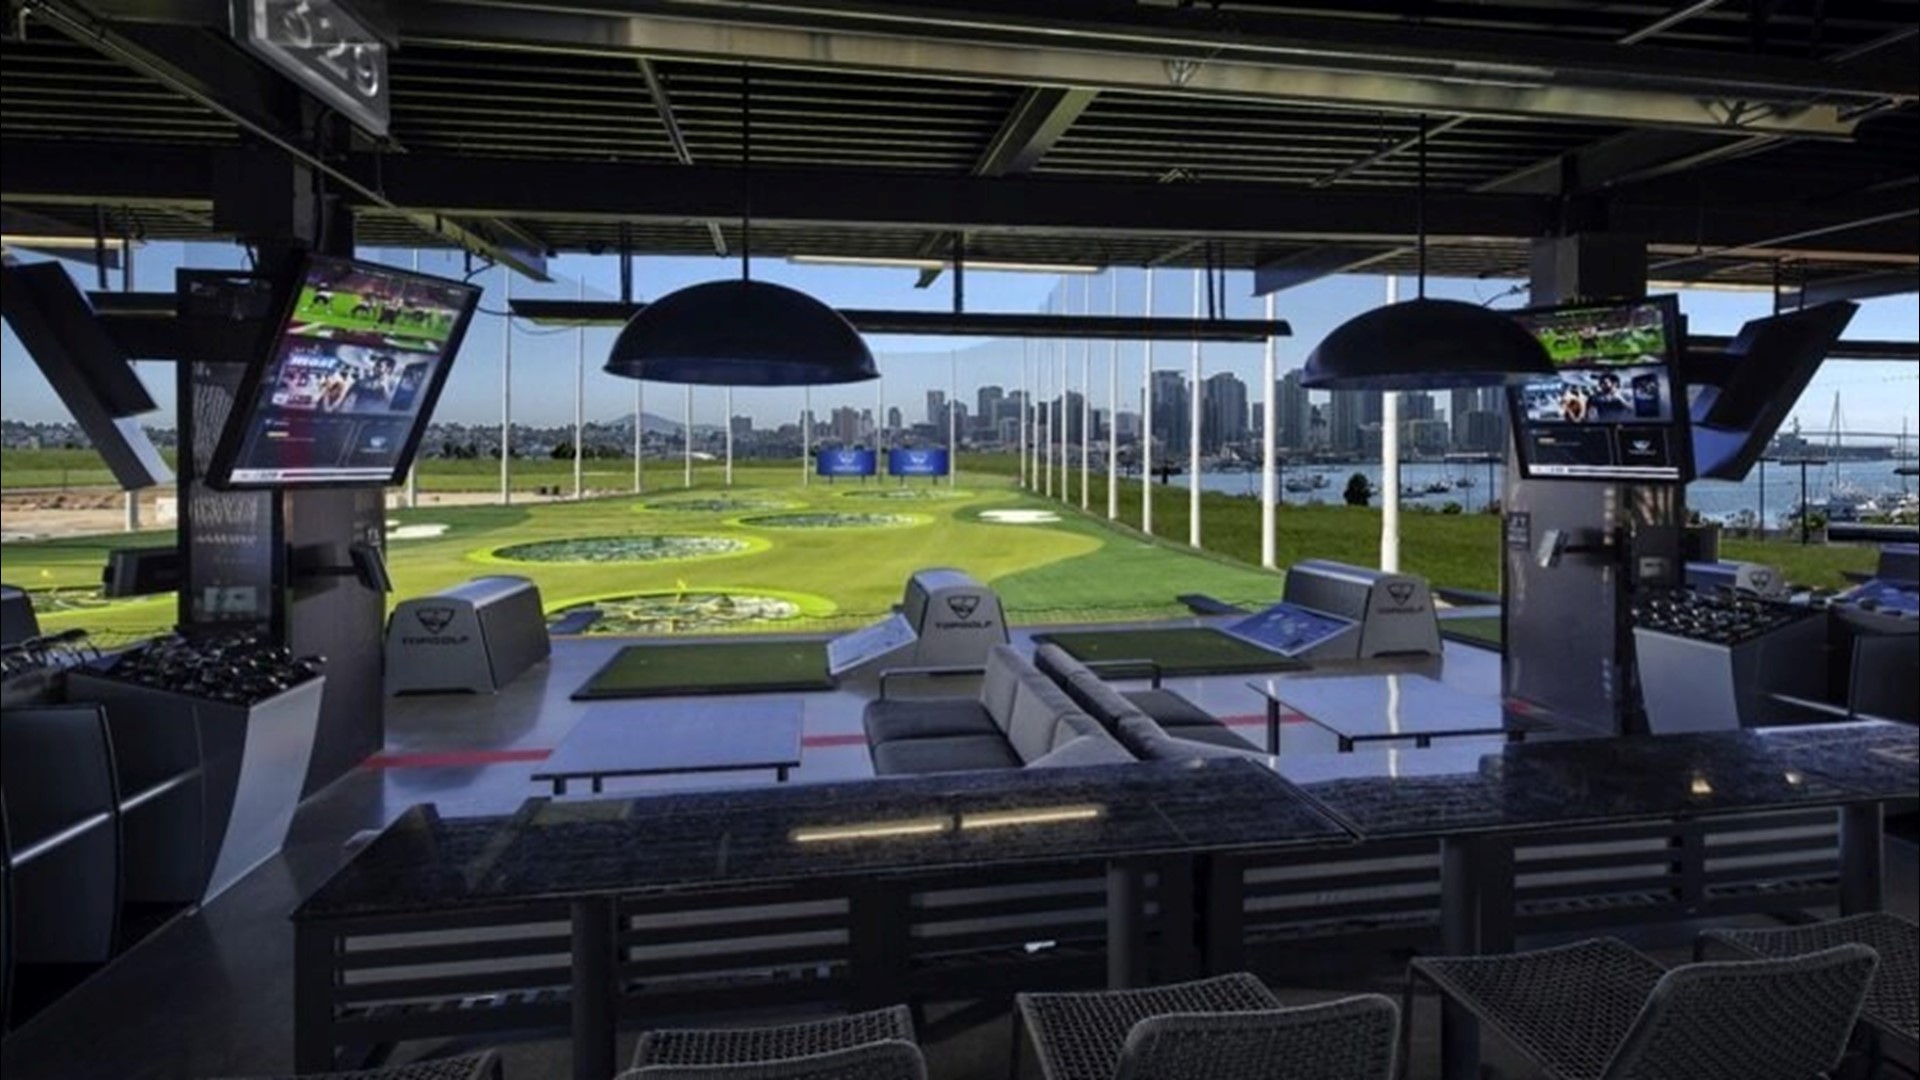 Topgolf is beginning plans to bring its popular golf and entertainment experience to Sorrento Valley and East Harbor Island, the company announced.